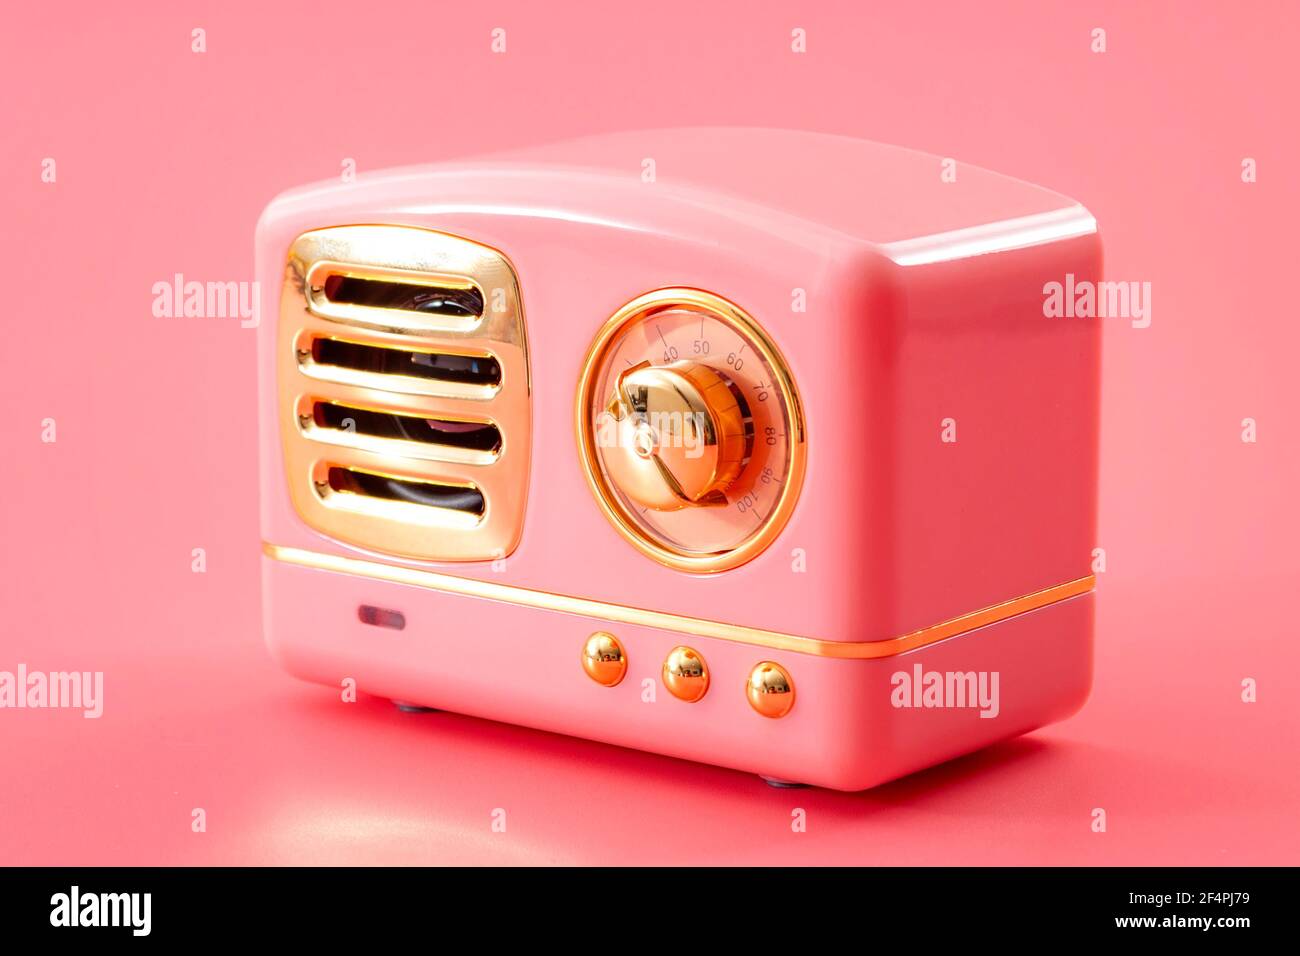 Vintage technology, 70s audio equipment and live music sound system concept theme with retro radio tuner with metal chrome knob isolated on pink backg Stock Photo